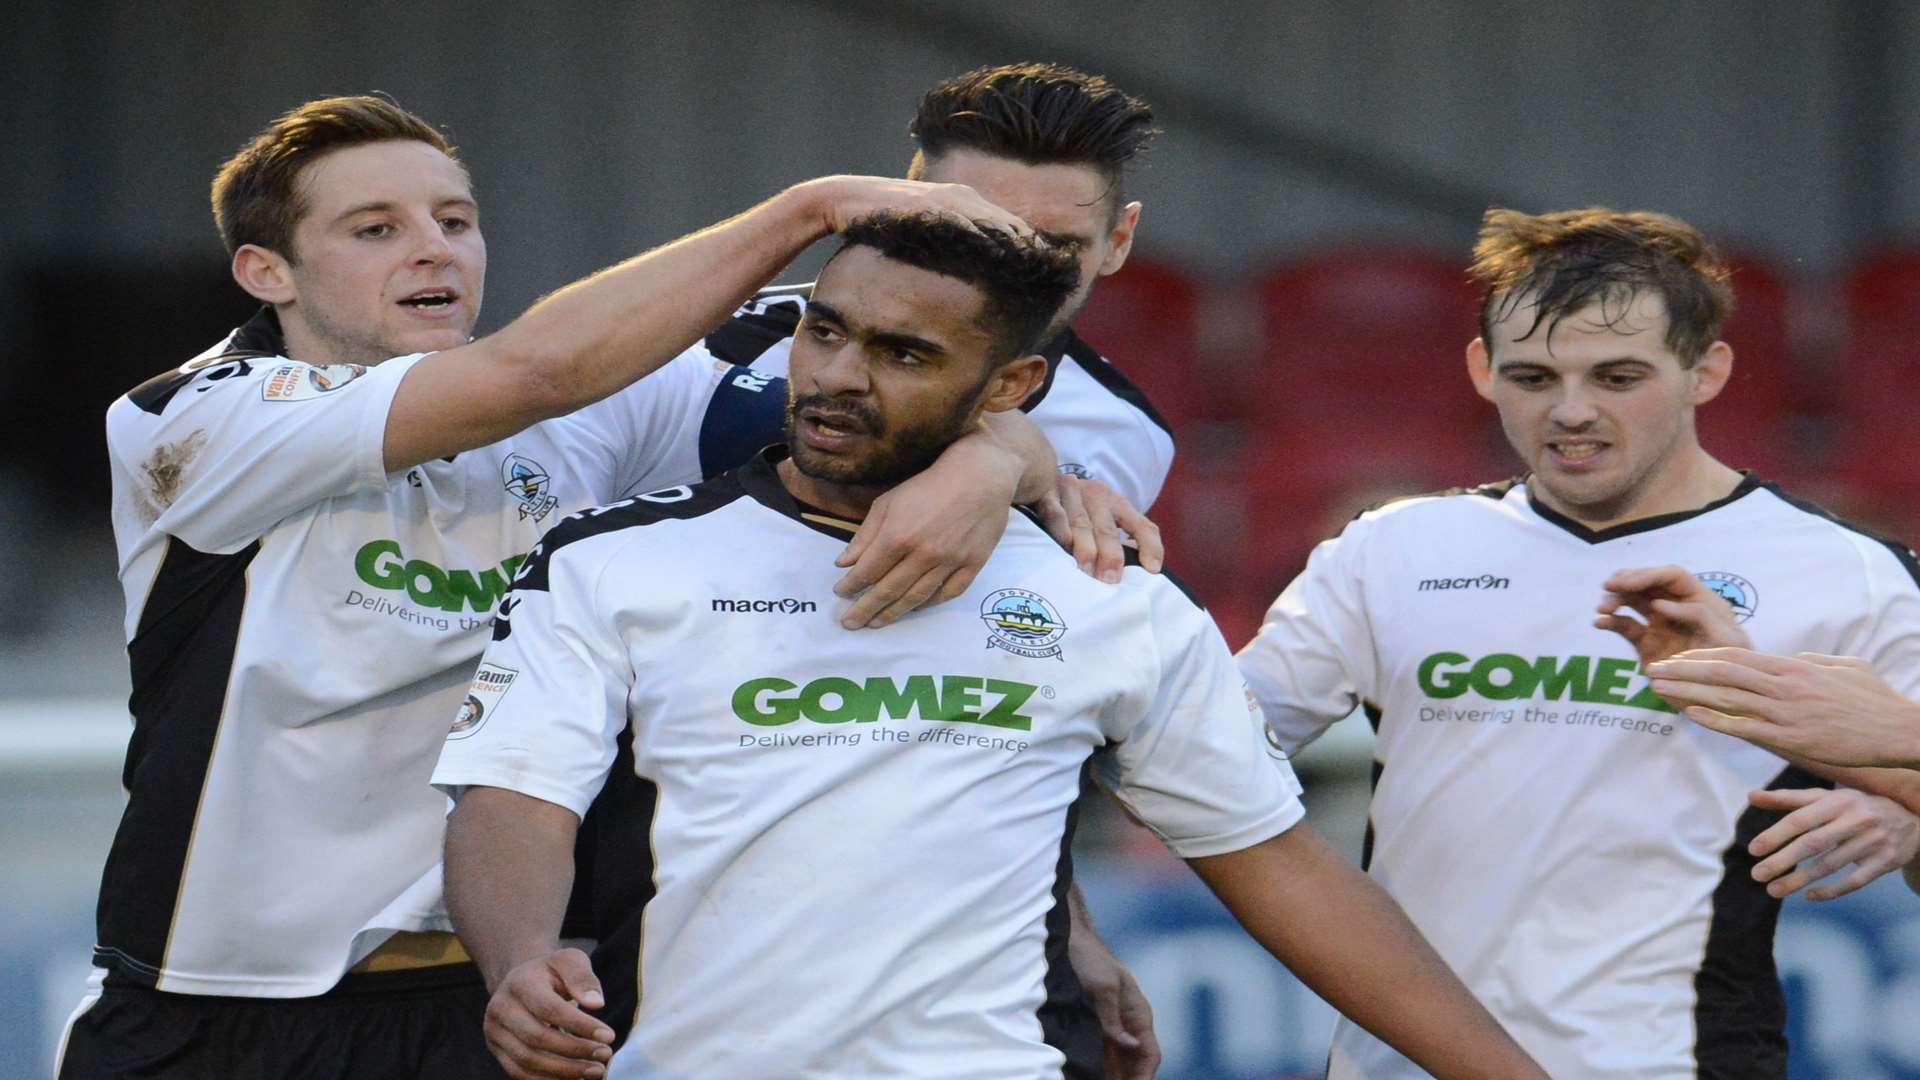 Dover striker Stefan Payne takes the congratulations after scoring the goal which knocked out Morecambe Picture: Gary Browne